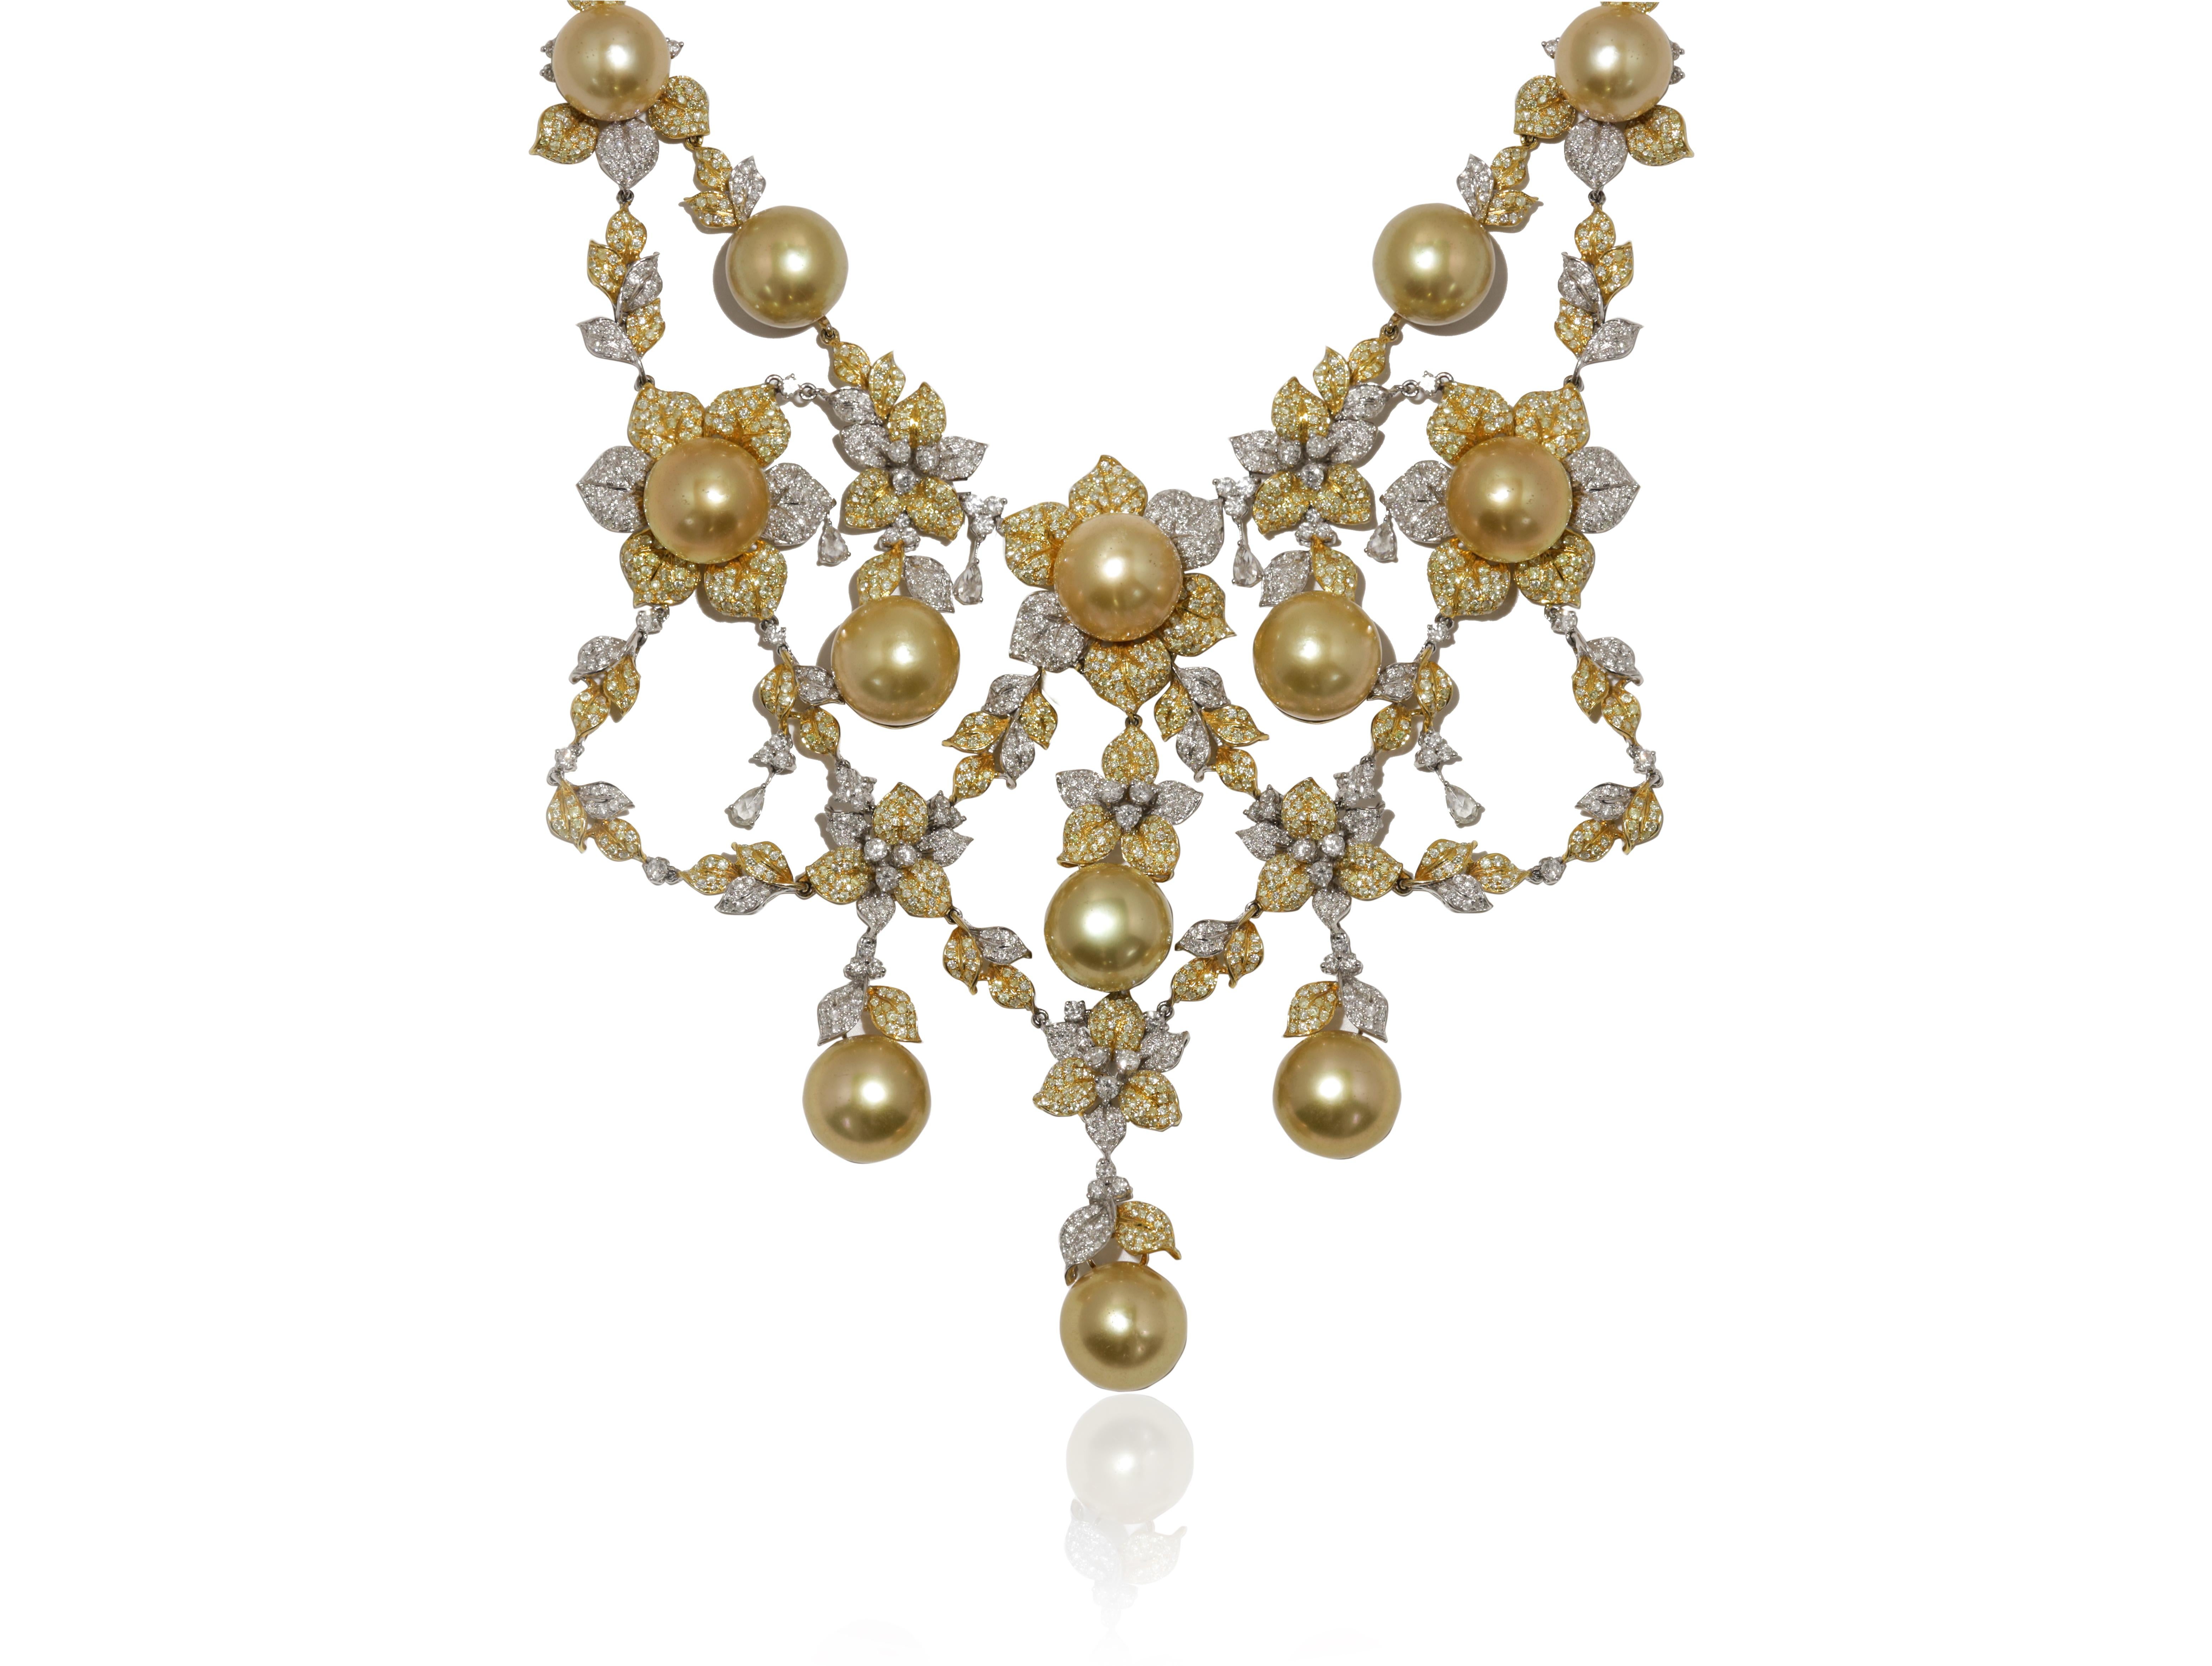 18 kt two tone pearl and diamond necklace adorned with pearls surrounded by 19.66 cts tw of diamonds in a flower design and separated by leaves and diamonds.
Diana M. is a leading supplier of top-quality fine jewelry for over 35 years.
Diana M is